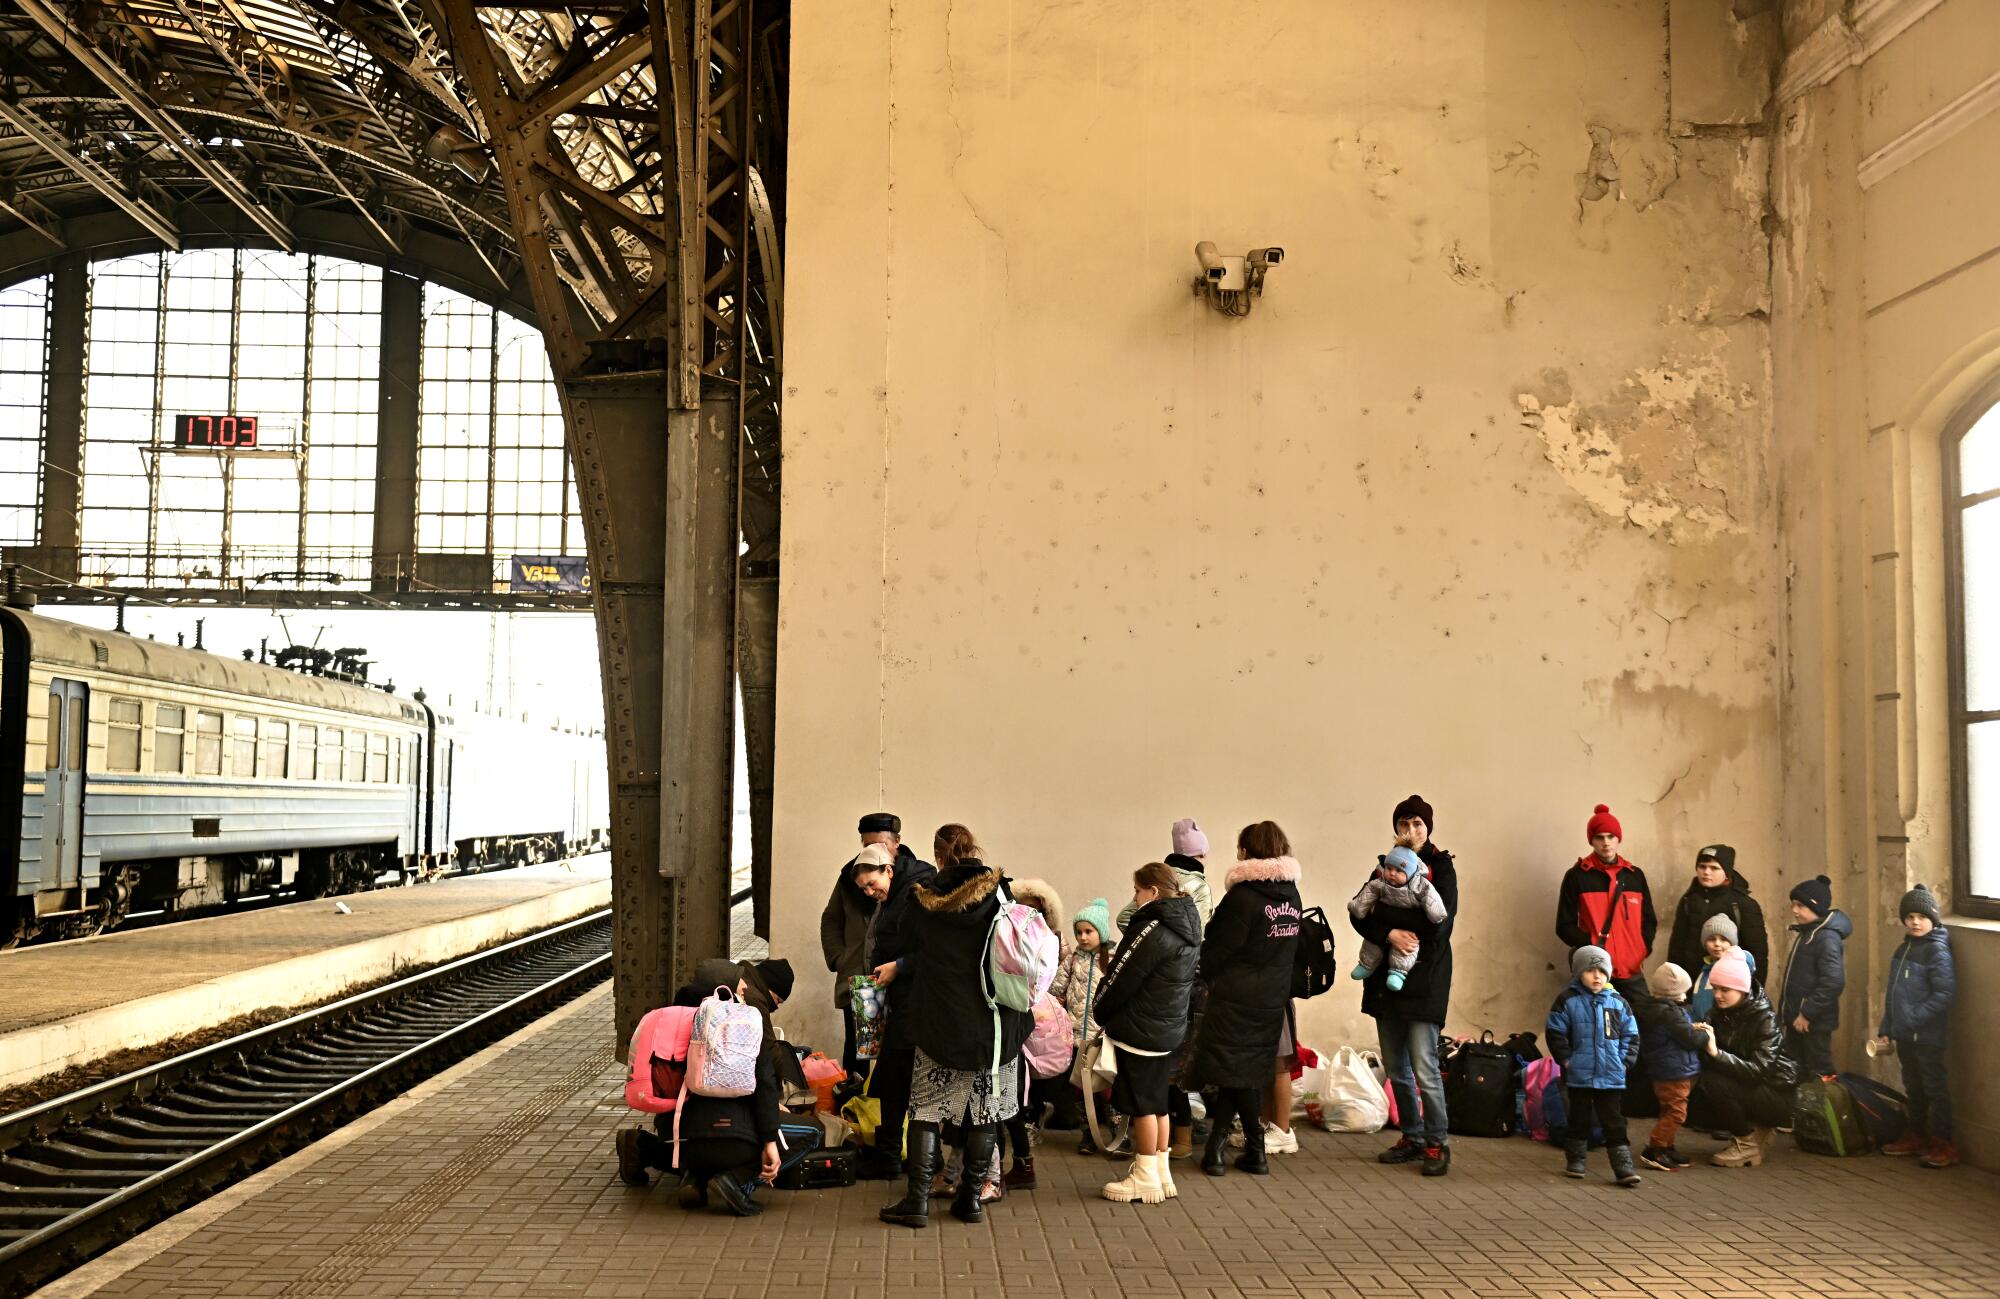 Refugees wait for the next train in Lviv, Ukraine trying to flee to Przemysl, Poland.